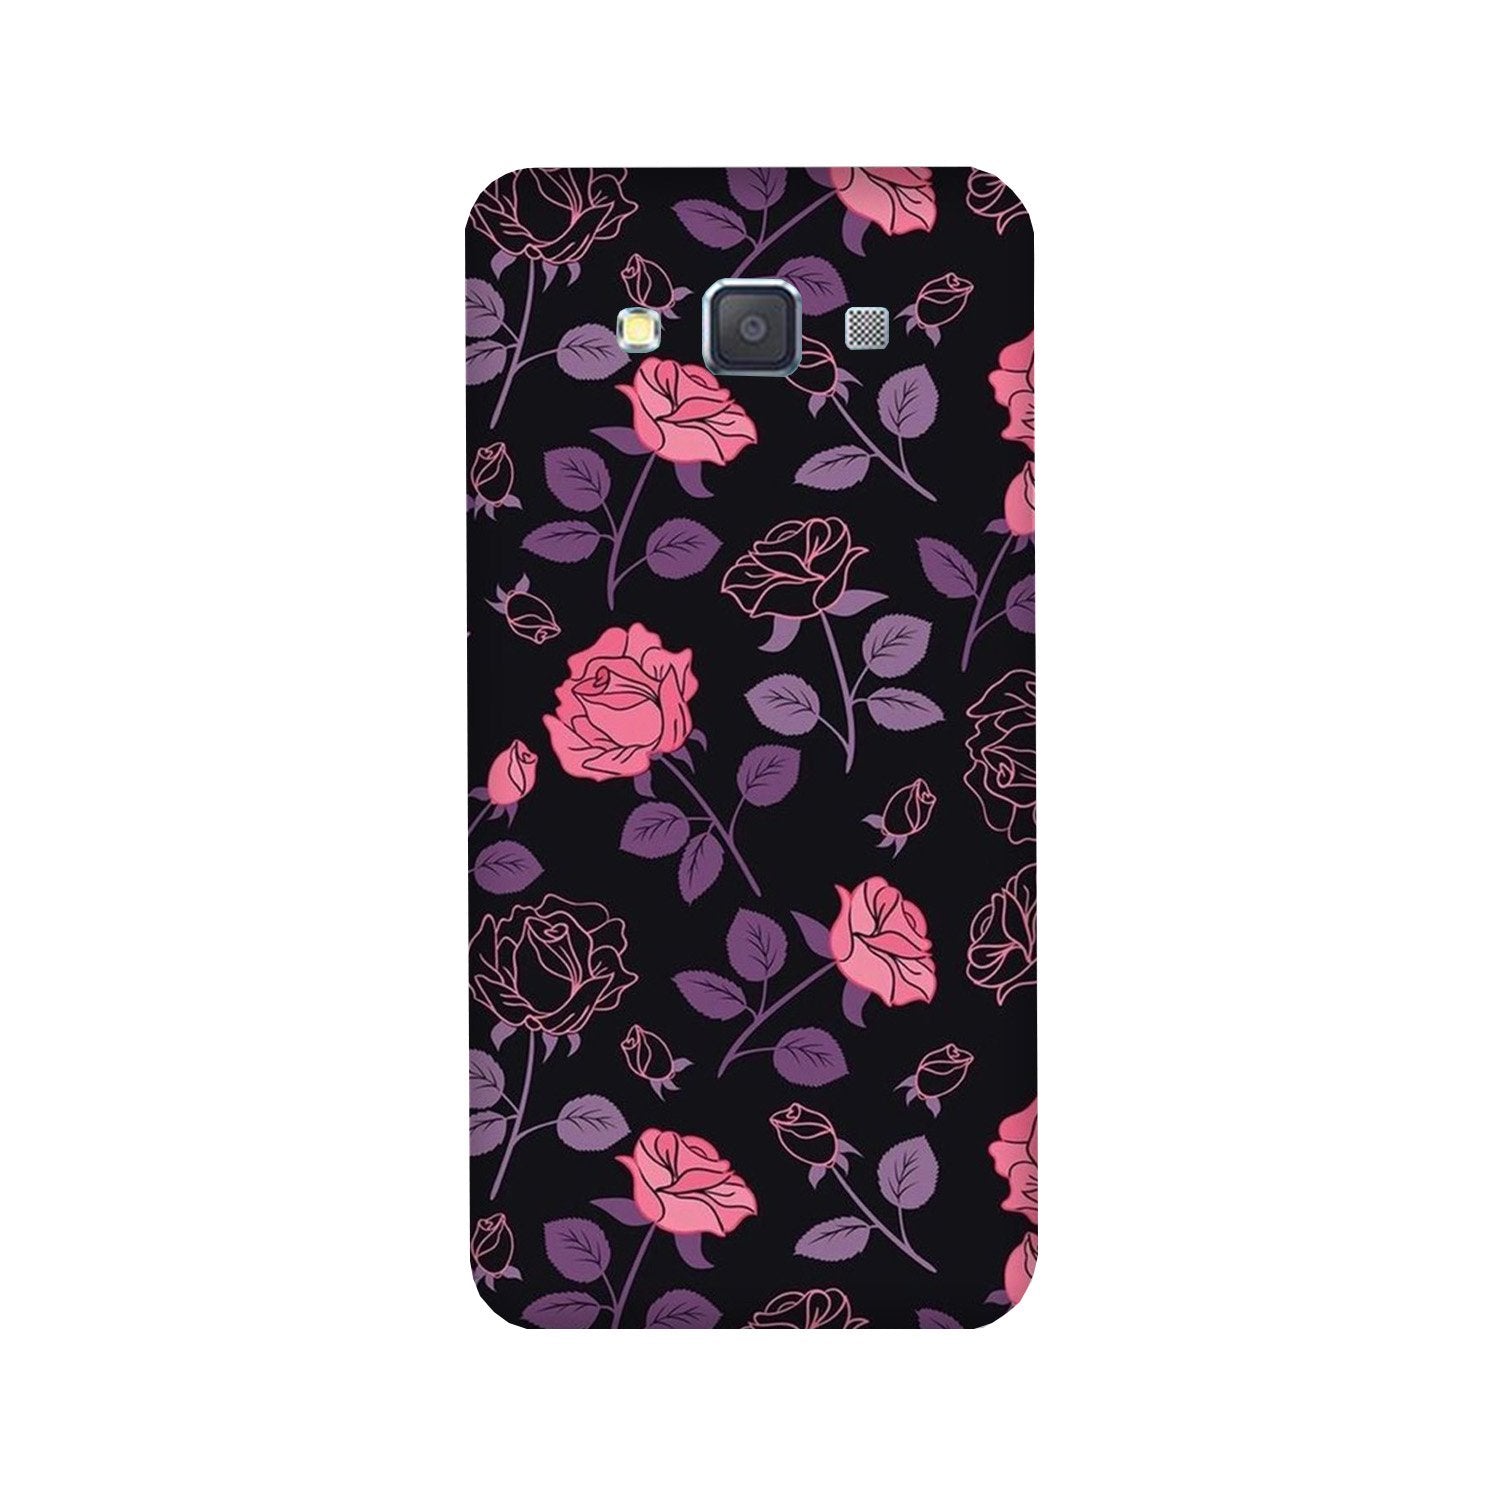 Rose Pattern Case for Galaxy E7